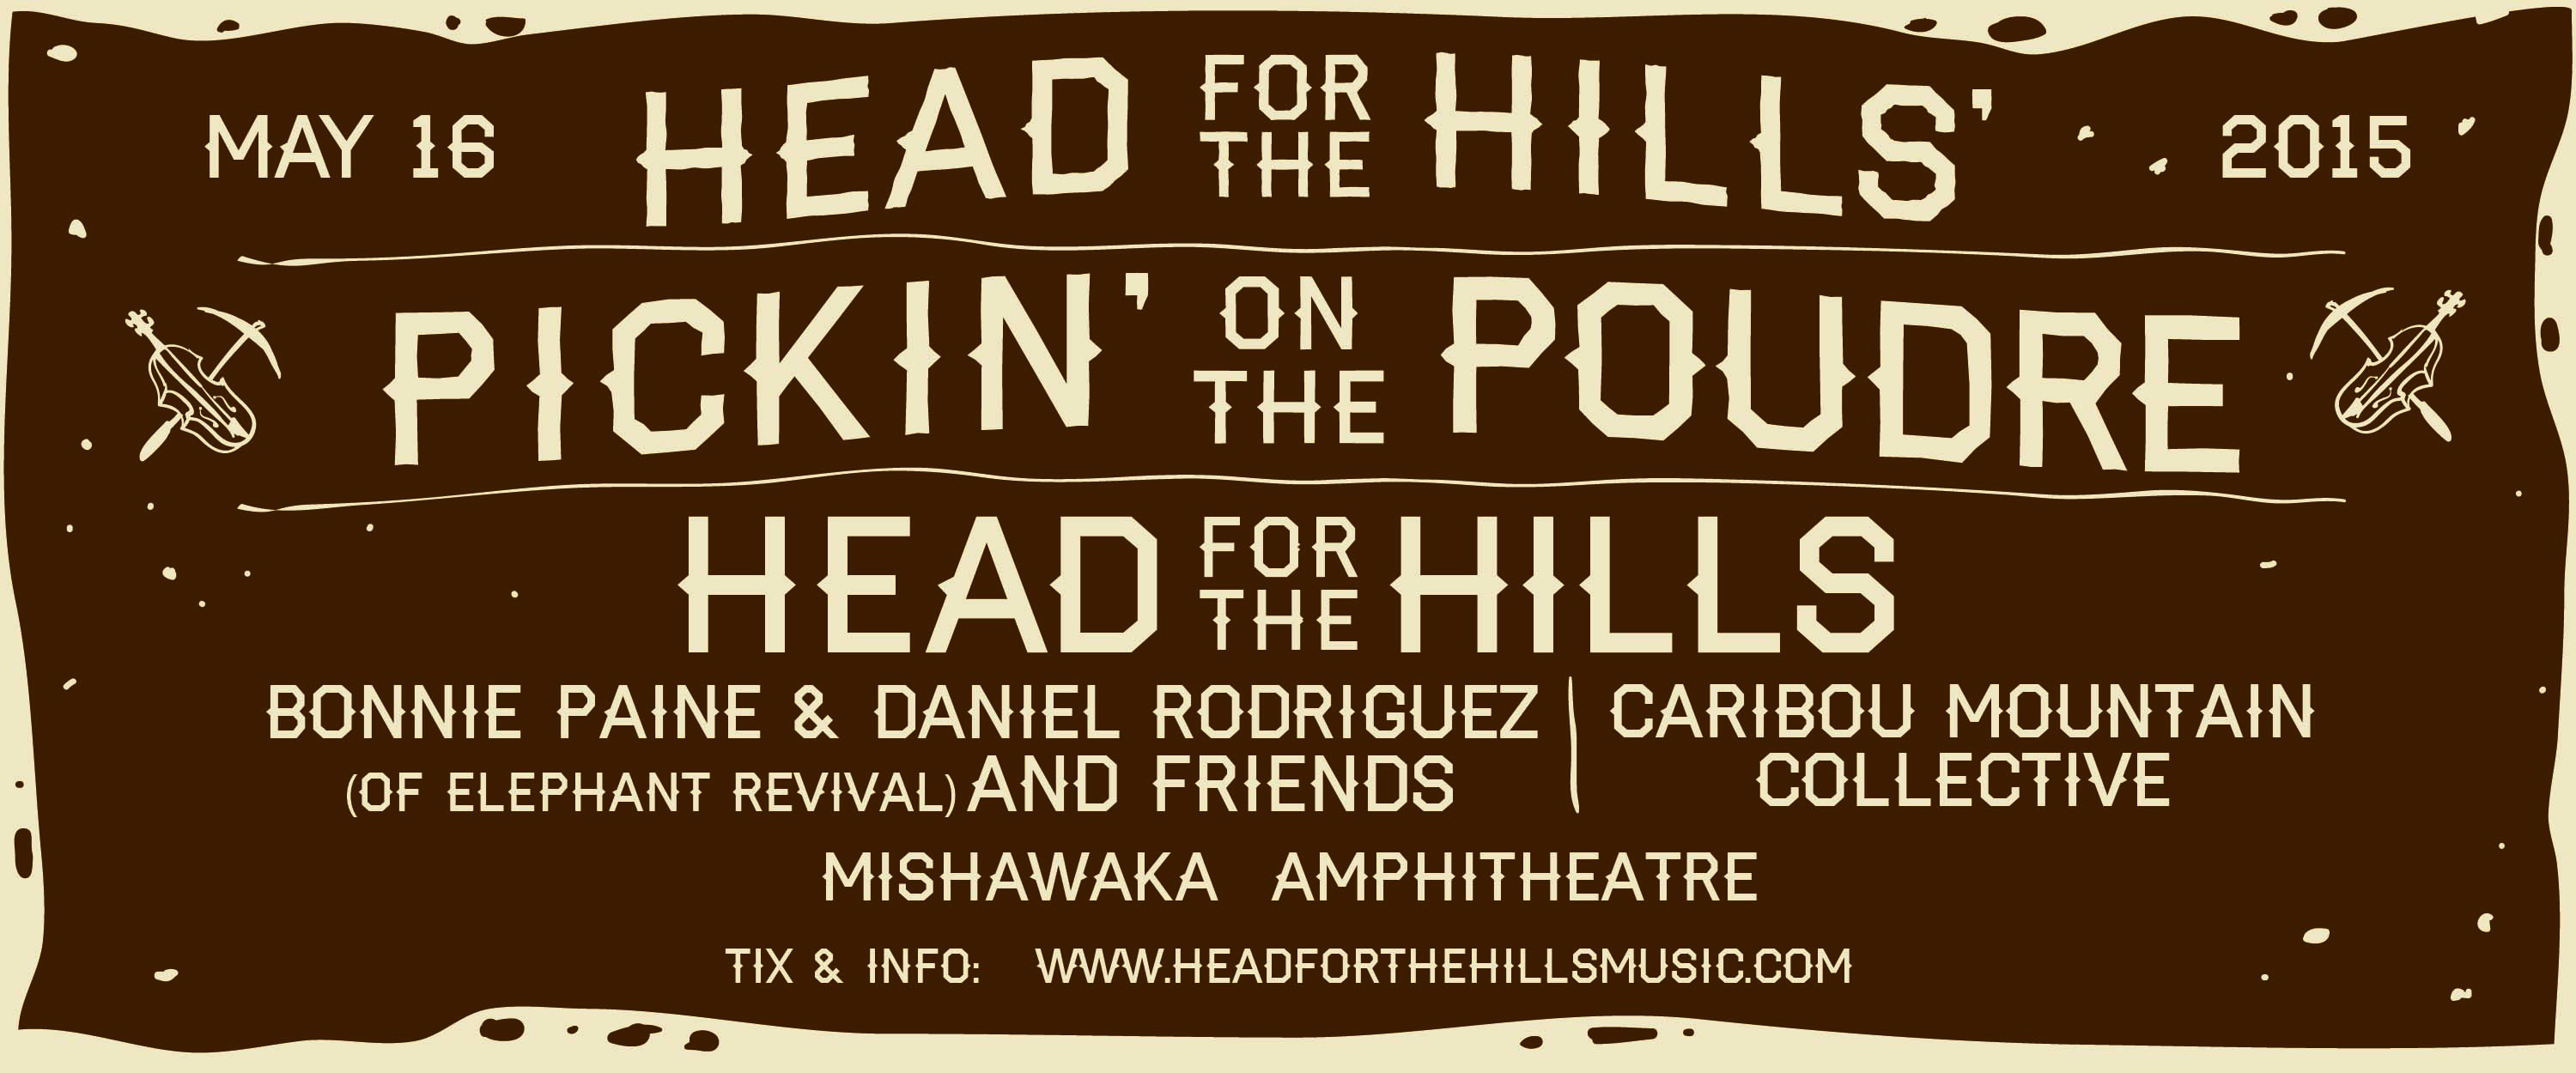 Head for the Hills' Pickin' on the Poudre - 5/16/15